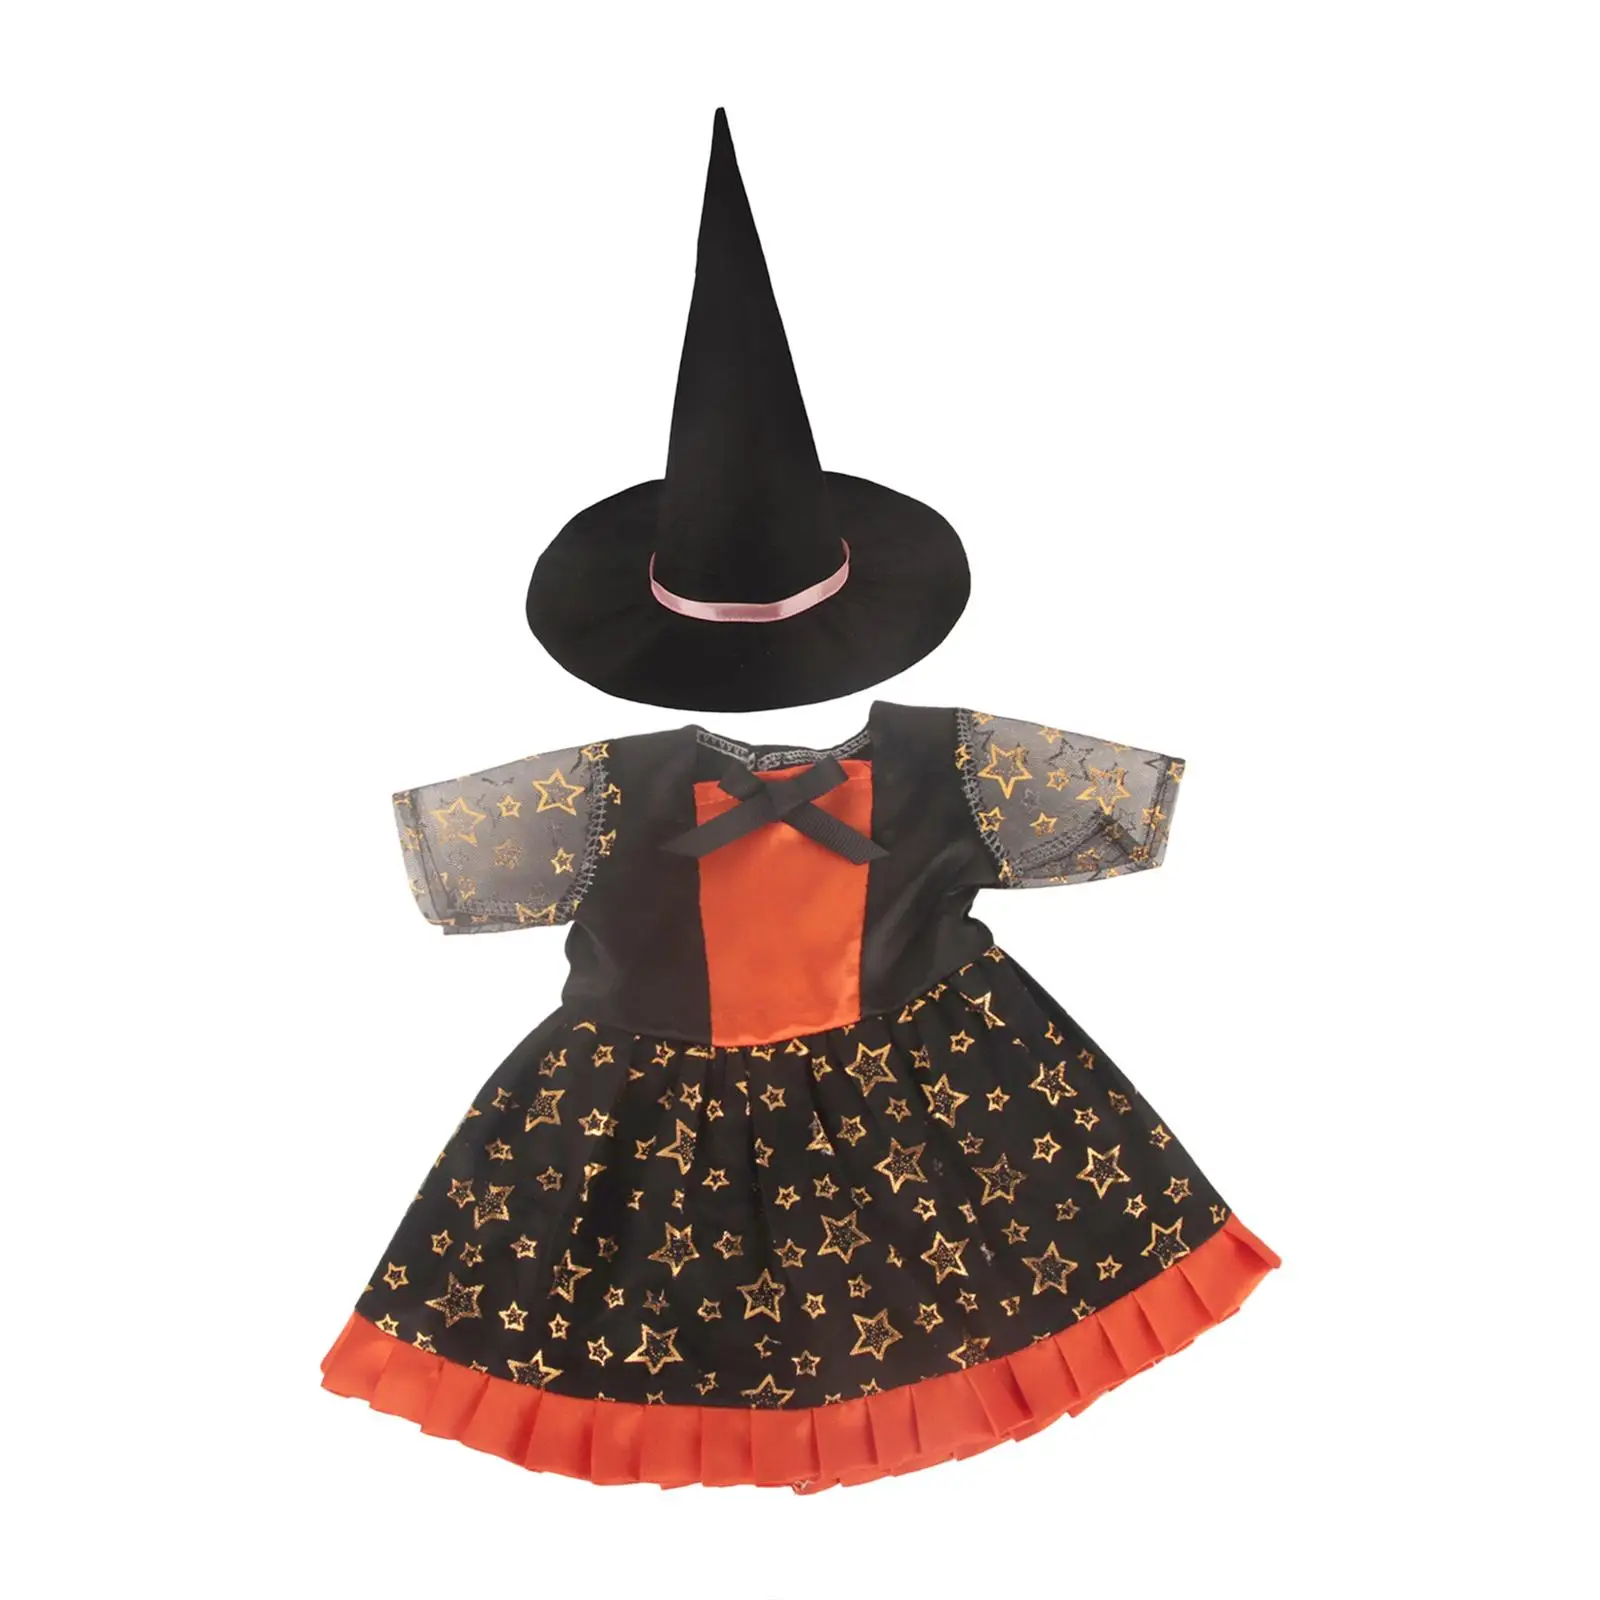 18 inch Doll Clothes Party Dress for Themed Party Carnivals Everyday Play